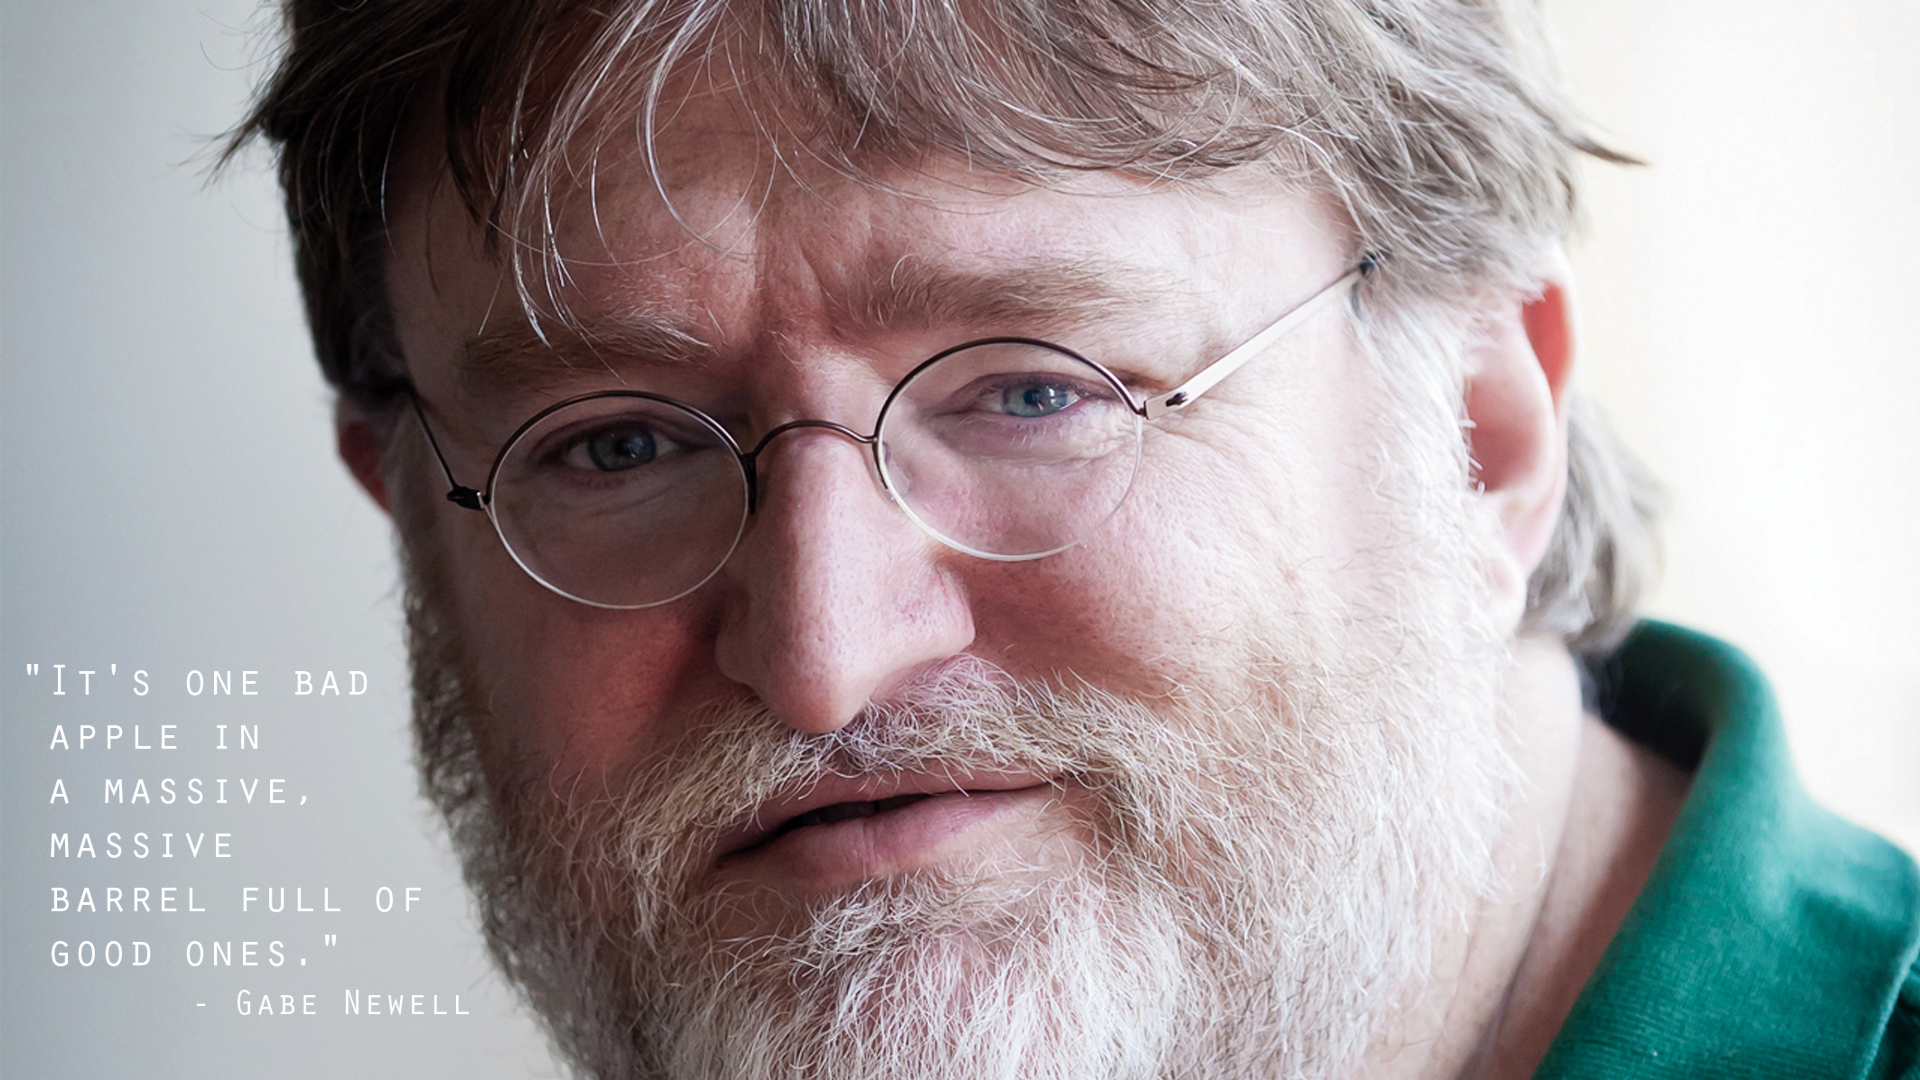 Gabe Newell Quotes. QuotesGram